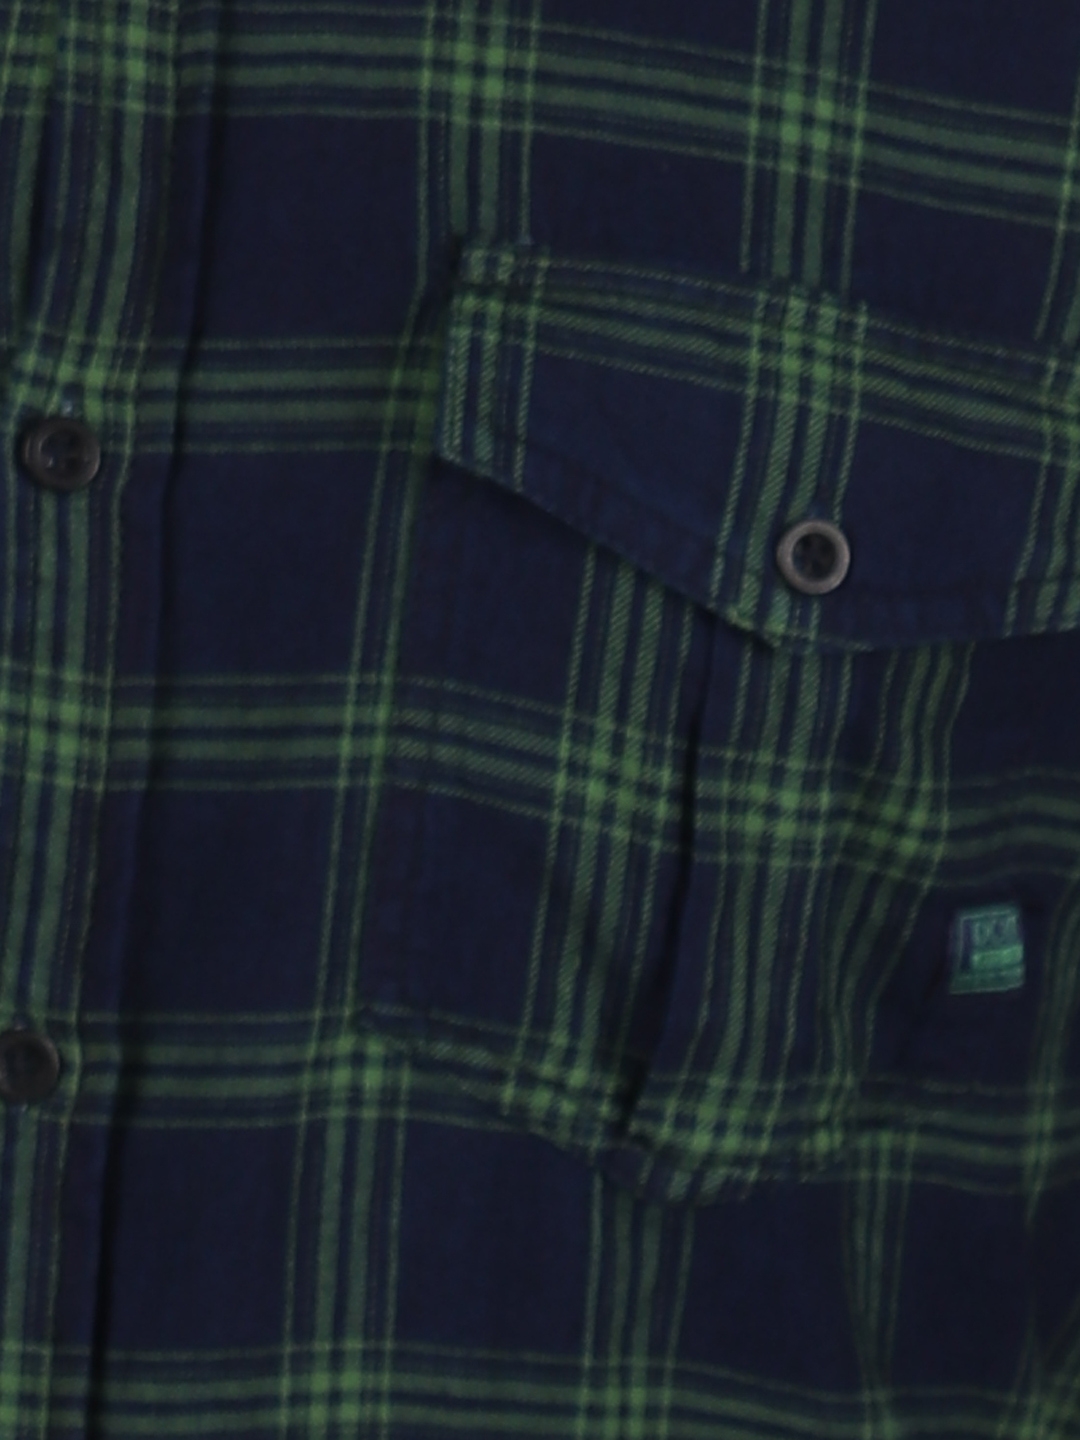 D'cot by Donear | D'cot by Donear Men's Green and Navy Cotton Casual Shirts 5